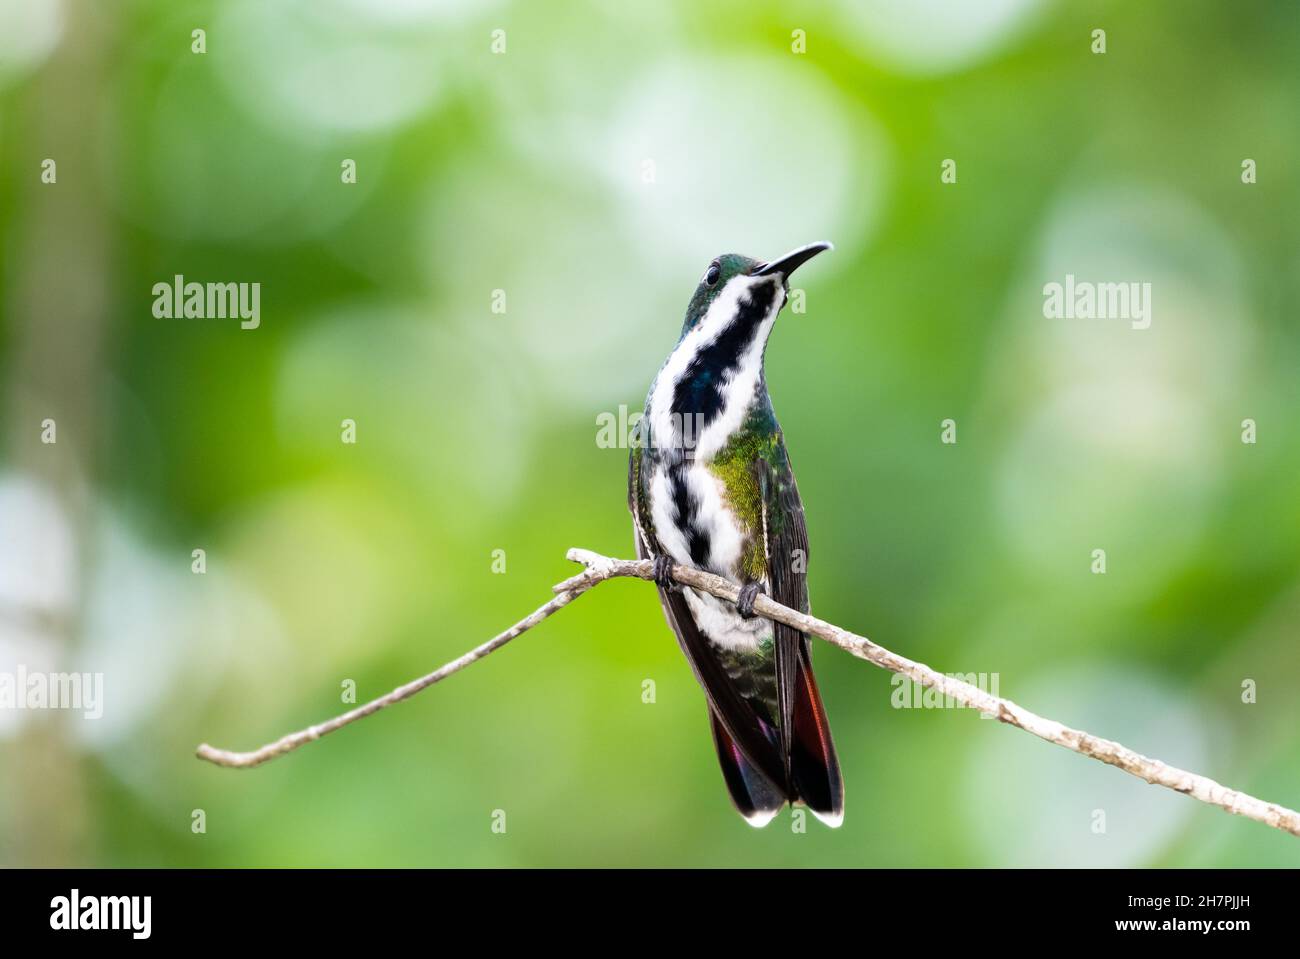 Pretty Black-throated Mango hummingbird, Anthracothorax nigricollis, perched on a branch with a green bokeh background. Stock Photo